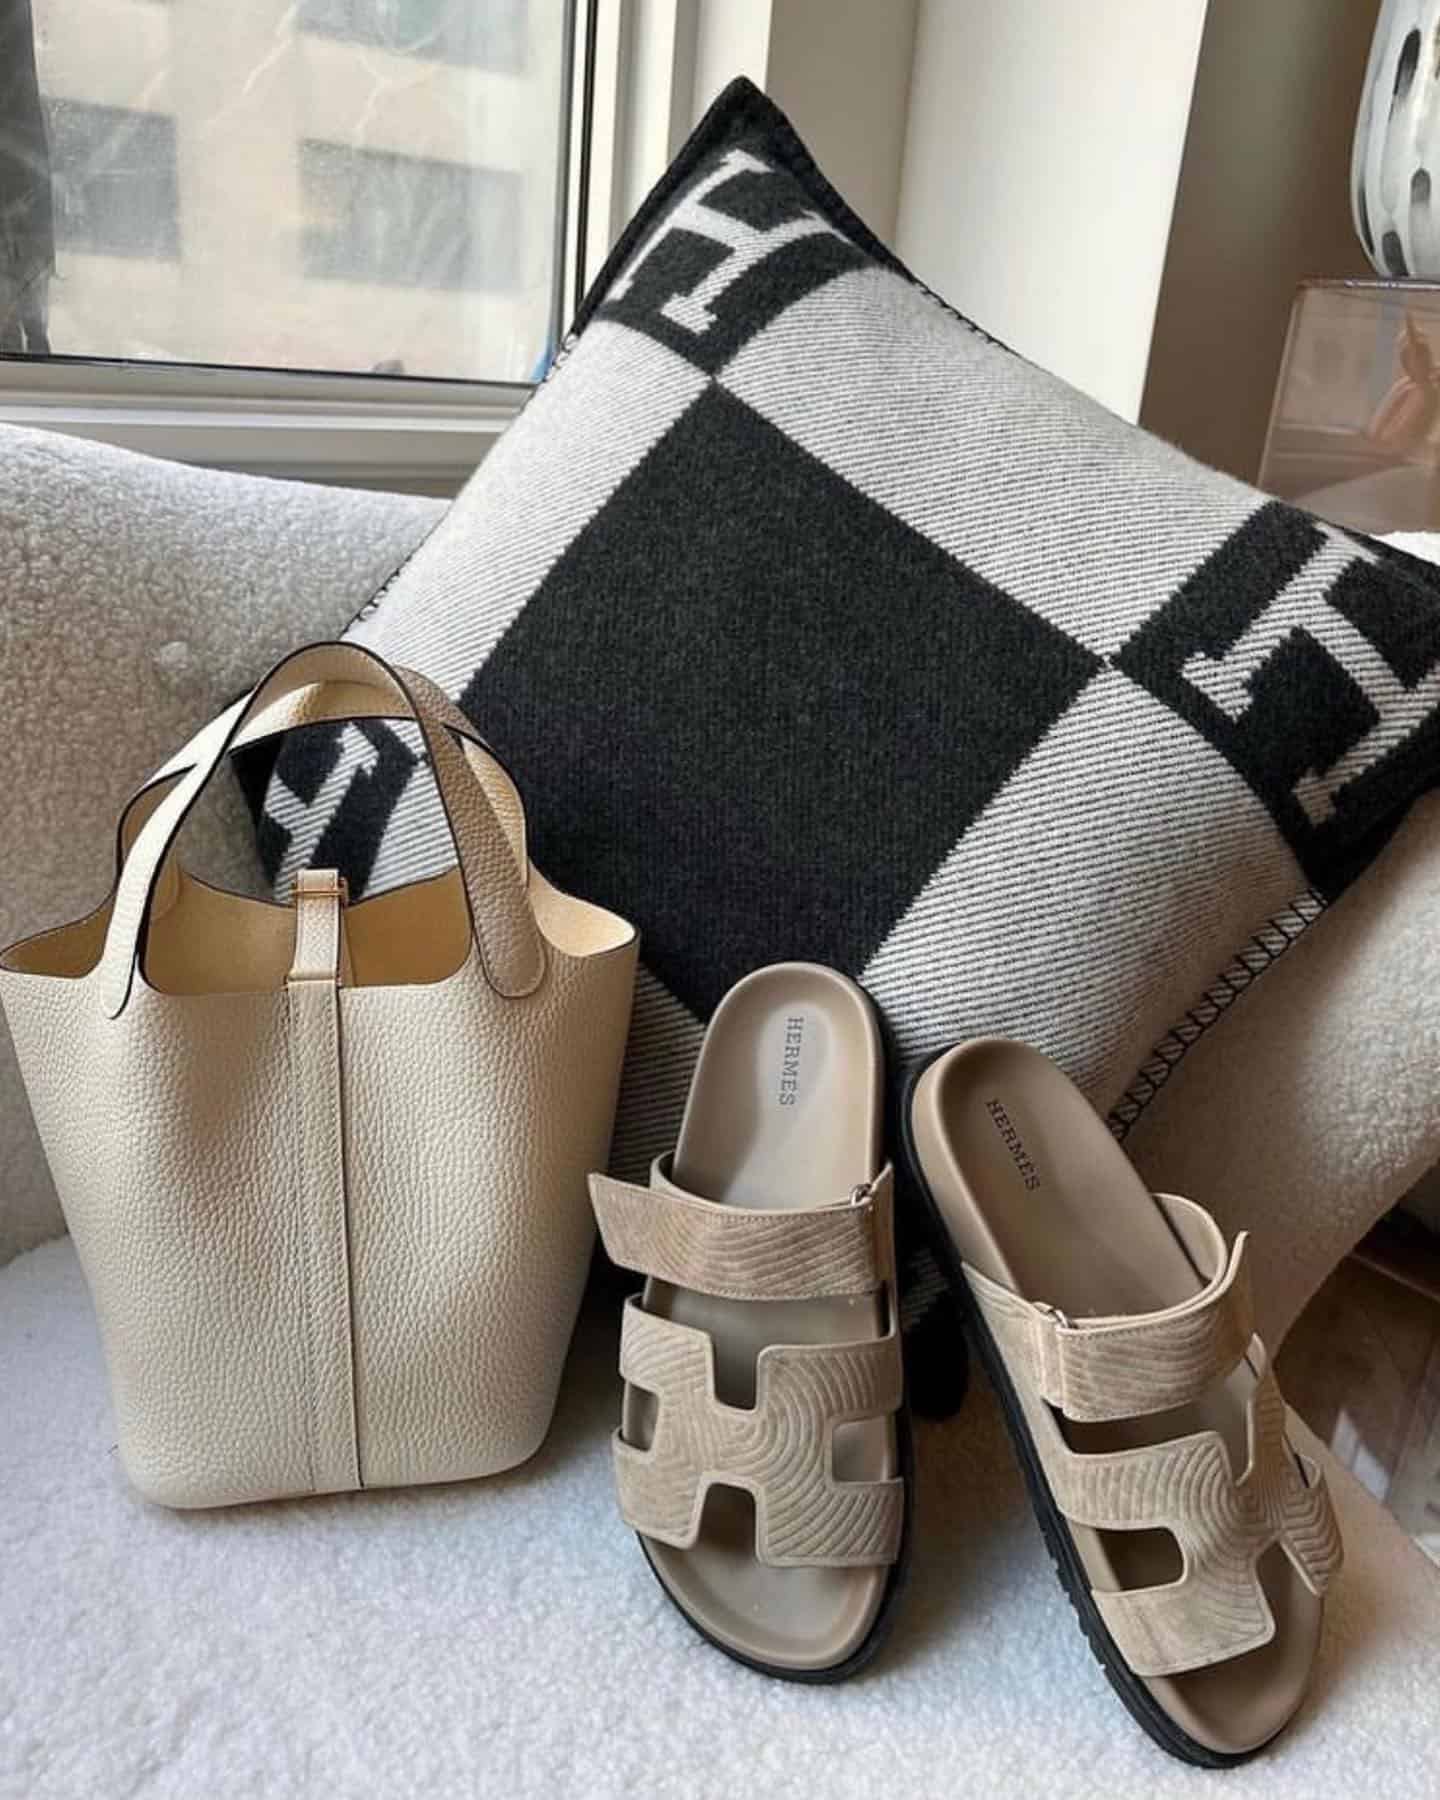 Hermes Sandals and Hermes Pillow and Hermes bag